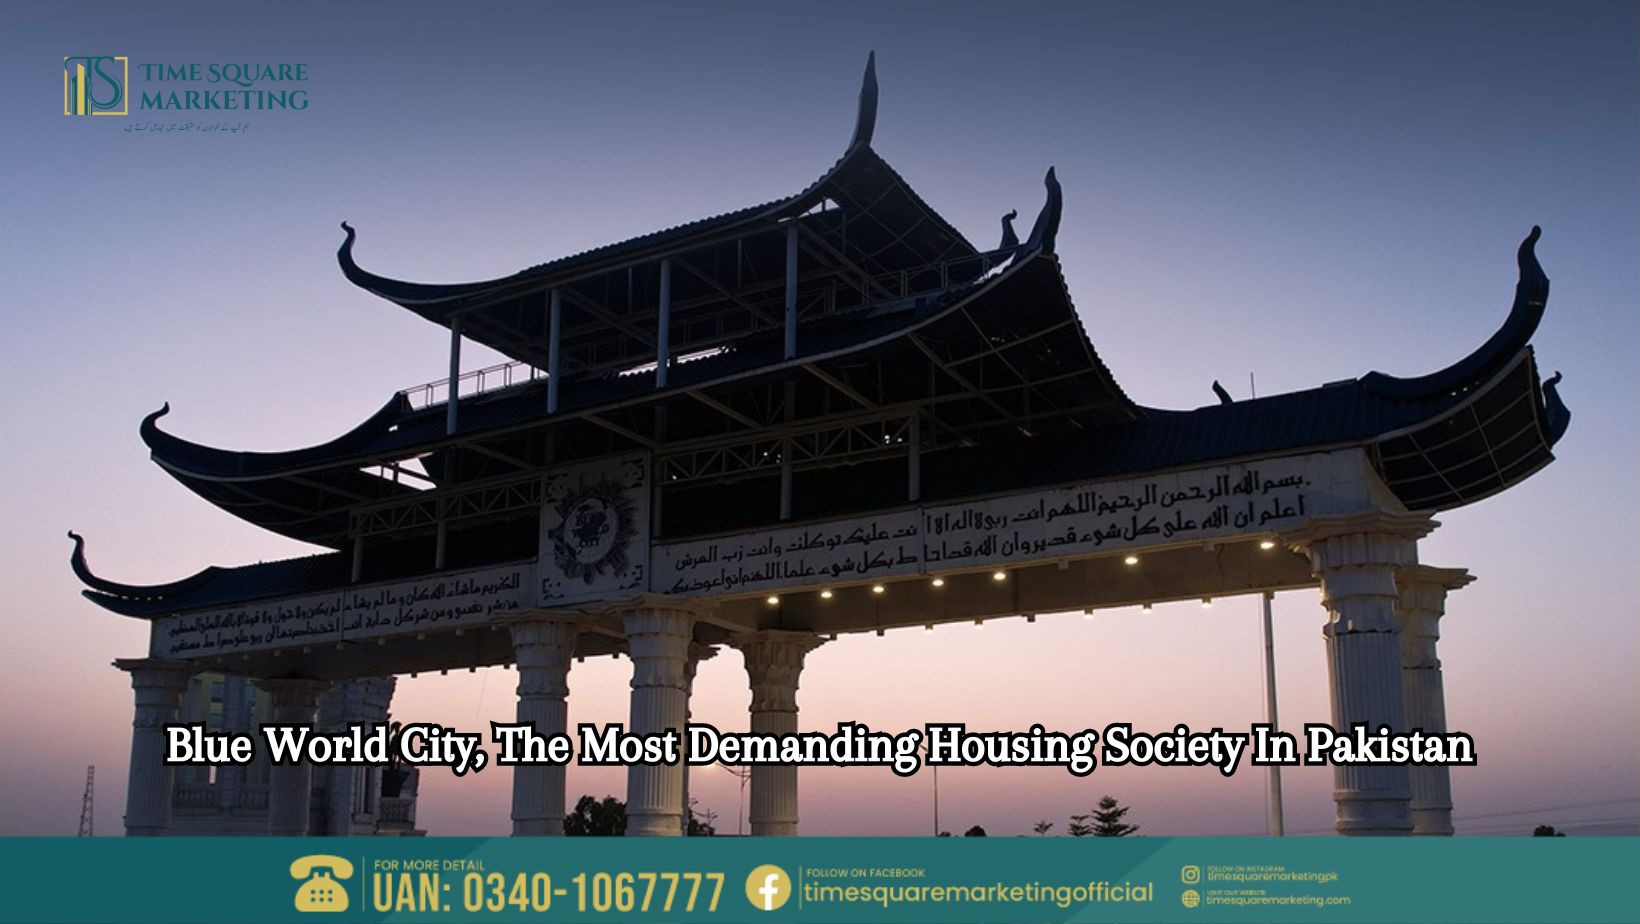 Blue World City, The Most Demanding Housing Society In Pakistan